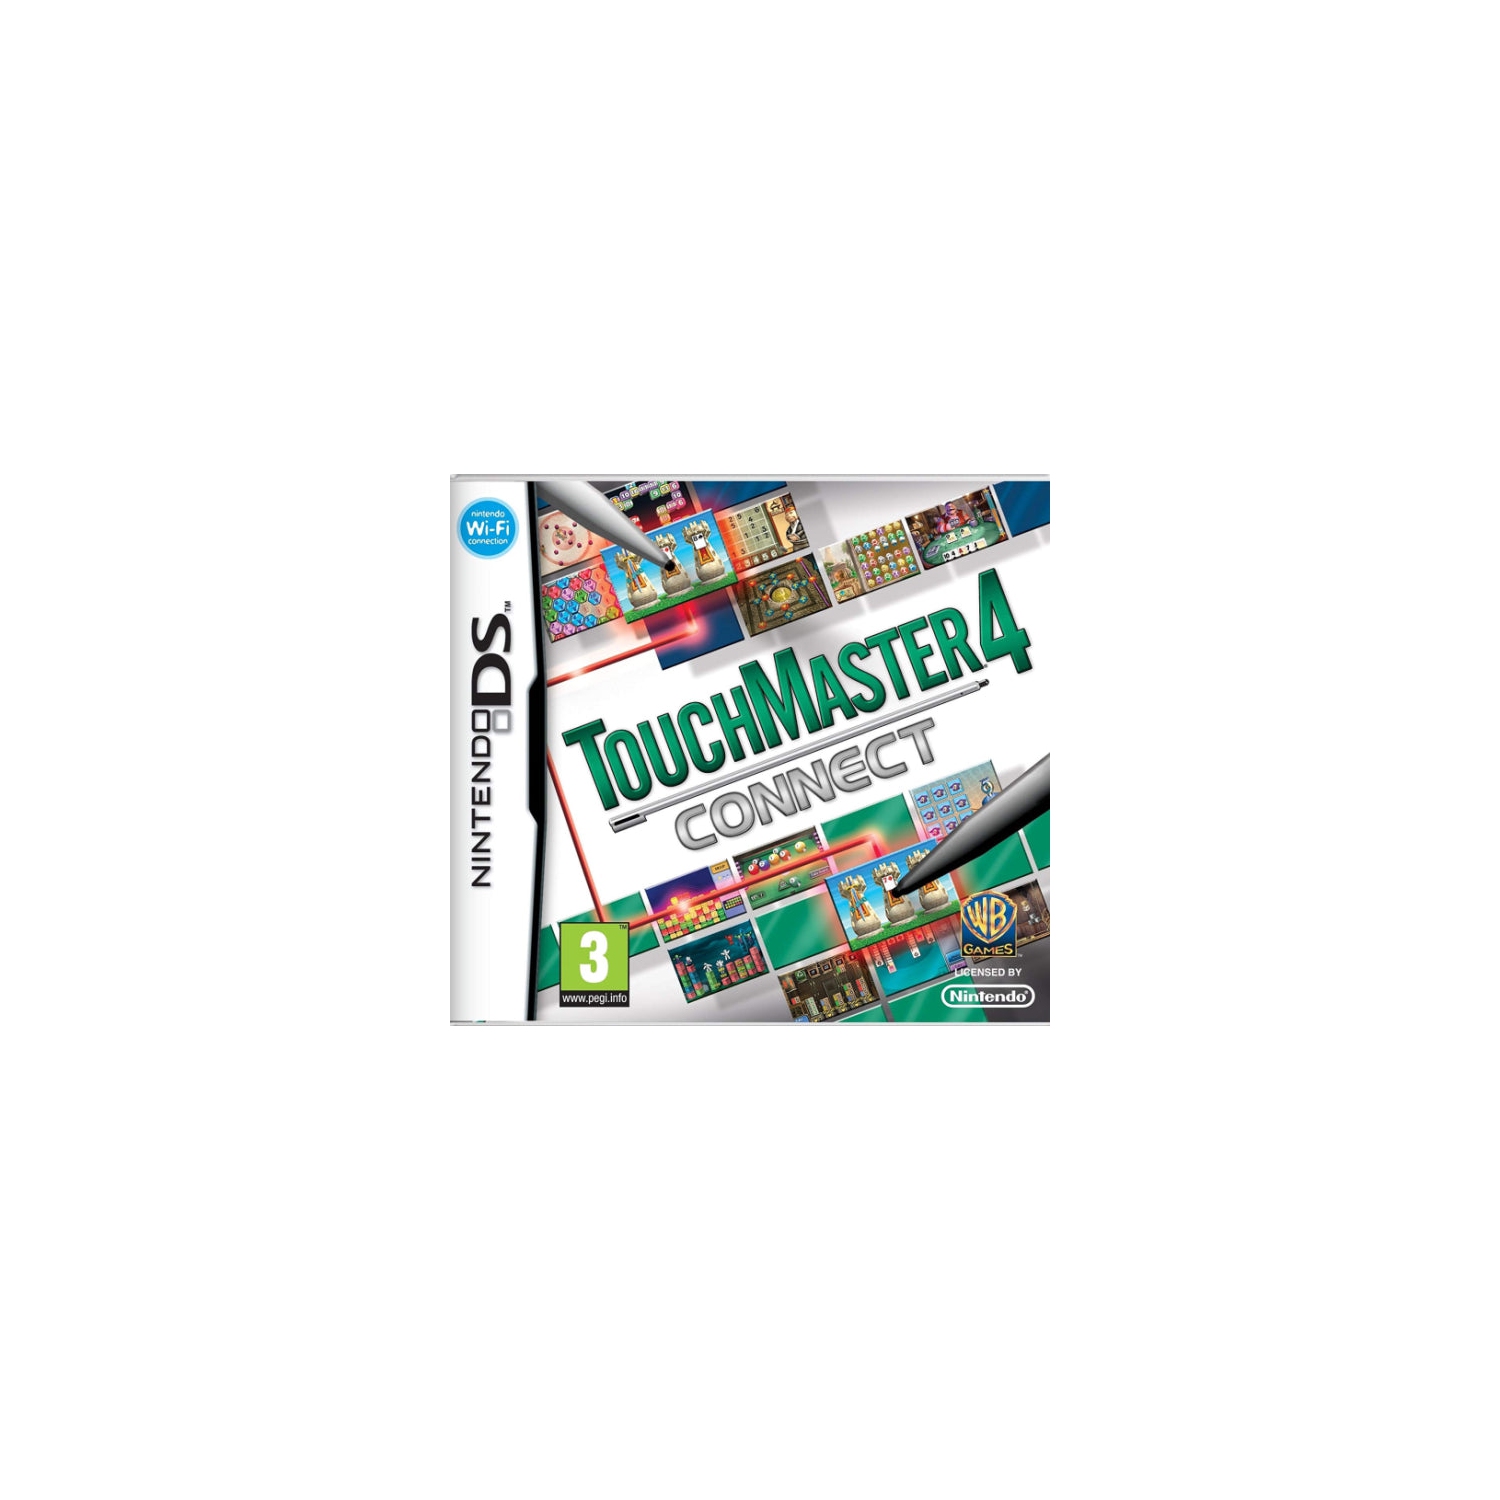 TouchMaster 4: Connect [Nintendo DS DSi]